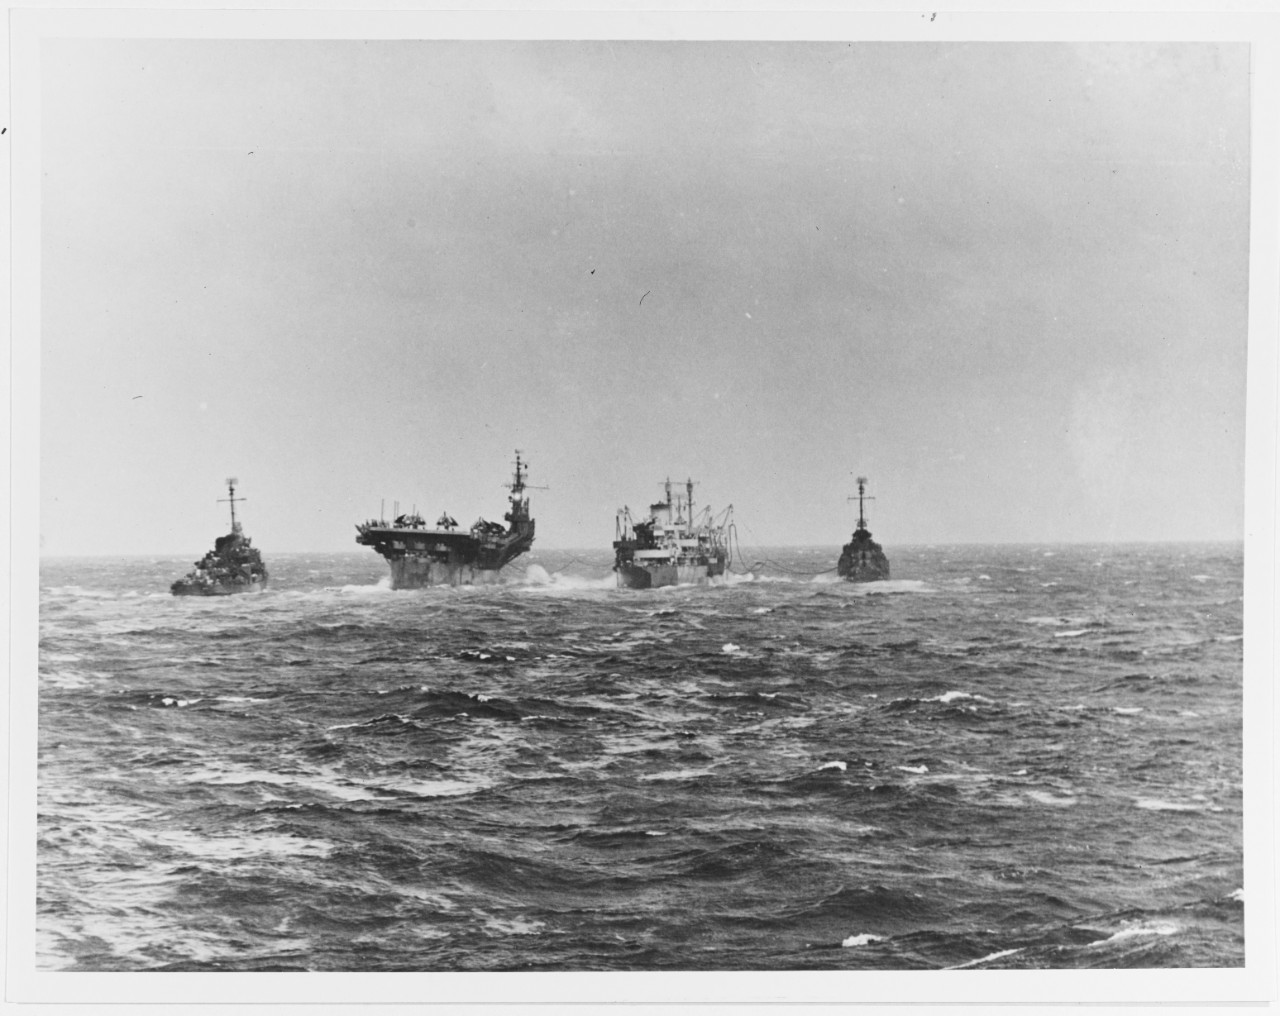 USS Langley (CVL-27) refueling at sea, 13 November 1944, during Philippines campaign. A destroyer approaches her stern to deliver mail.